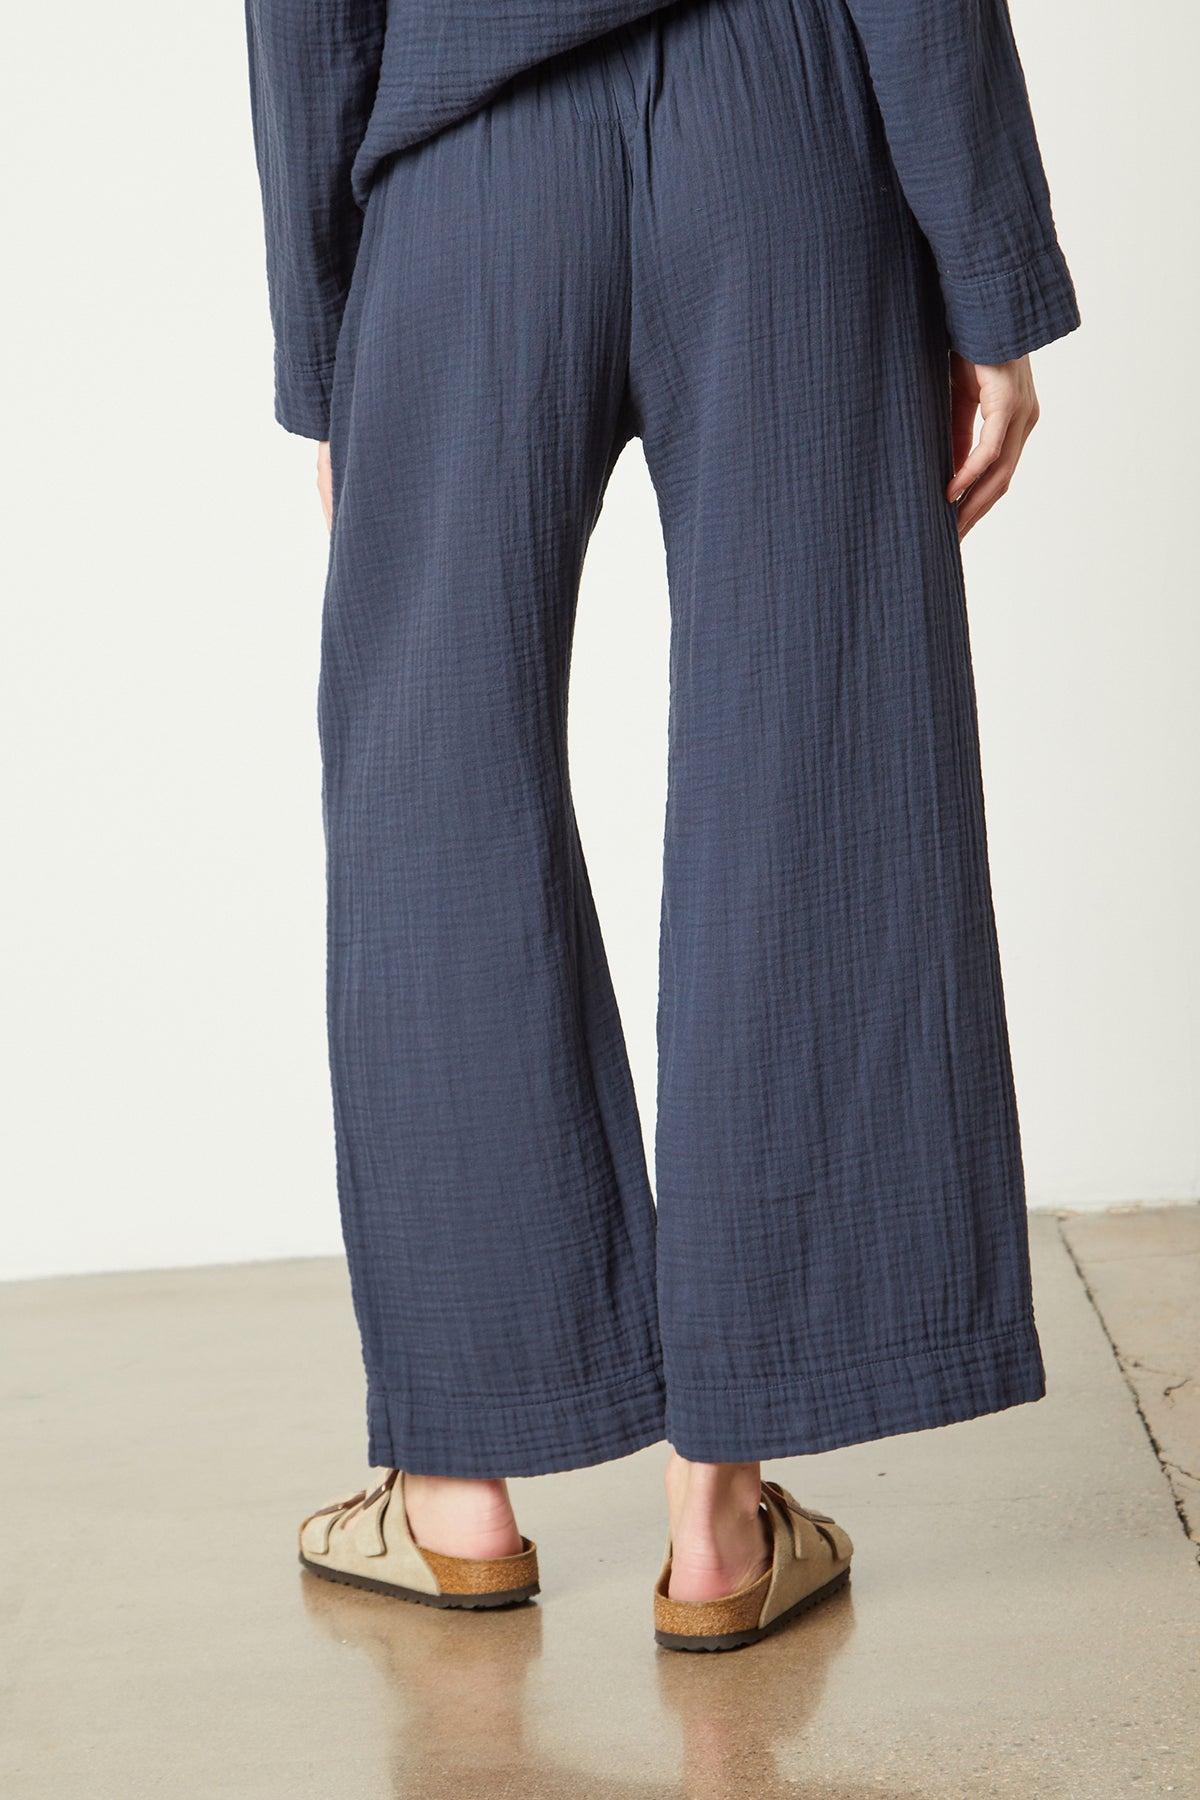 The back view of a woman wearing a blue wide leg PAJAMA PANT by Jenny Graham Home.-25519563309249